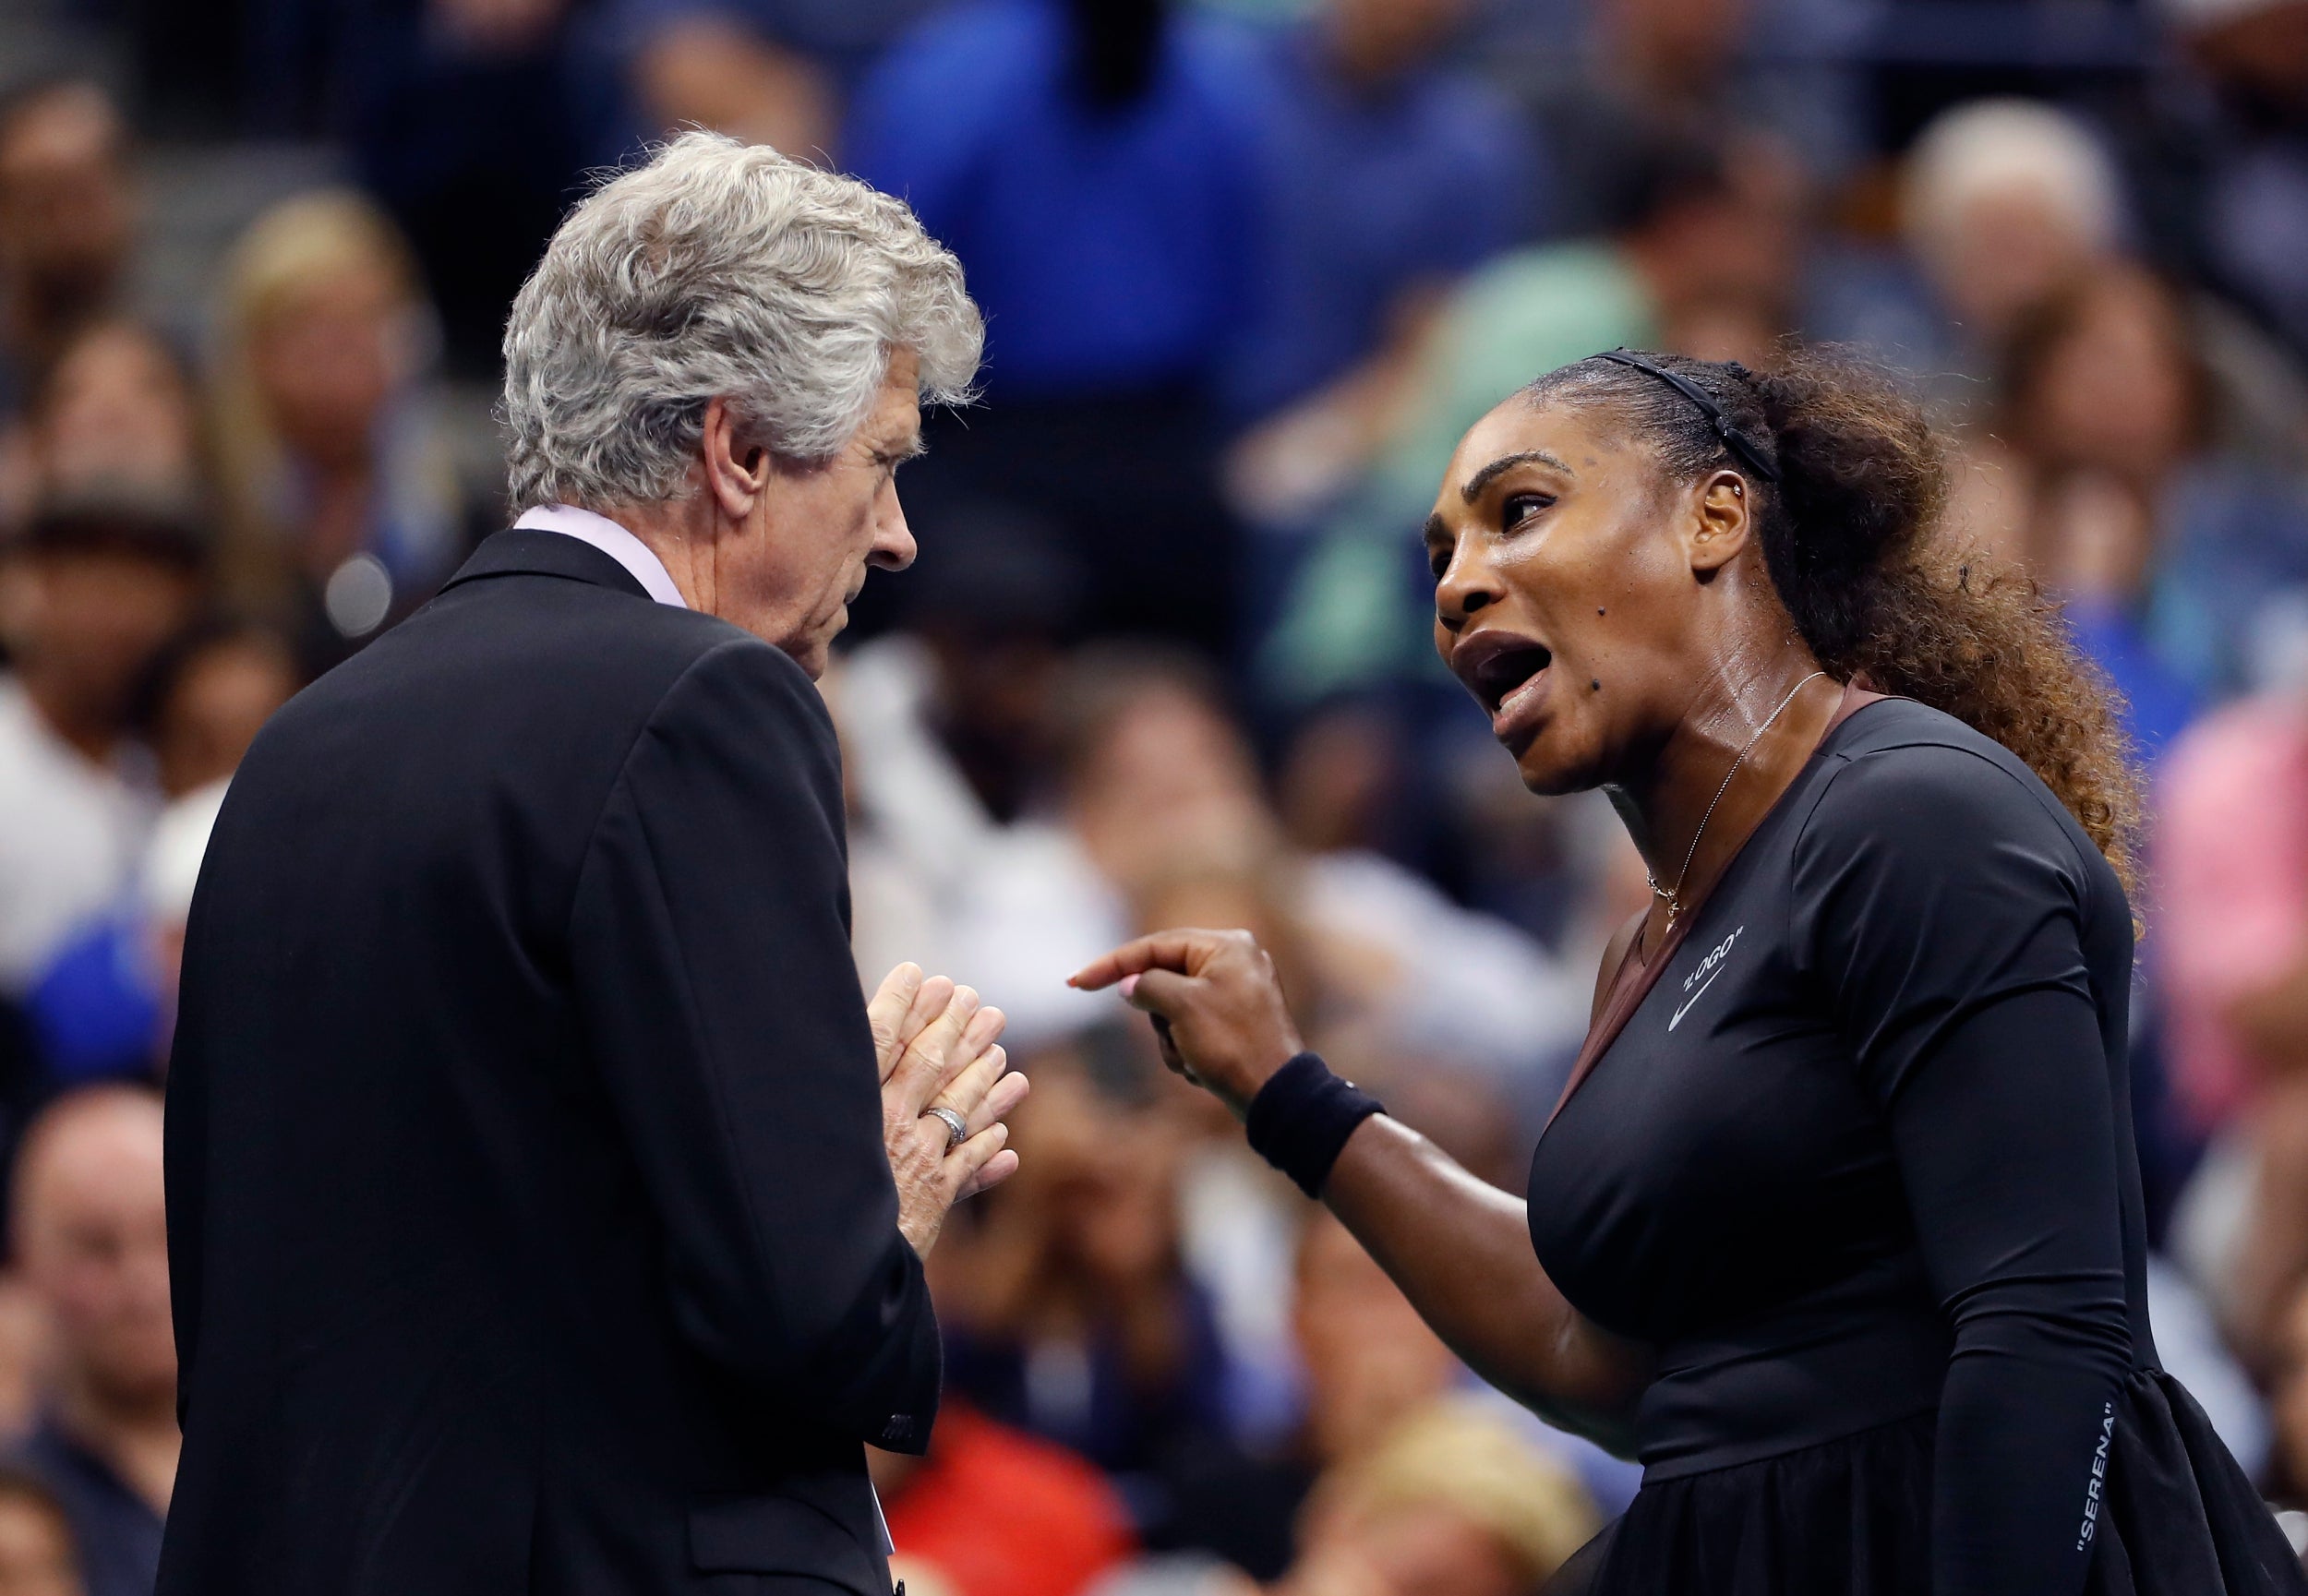 Williams' outburst overshadowed Osaka's victory somewhat